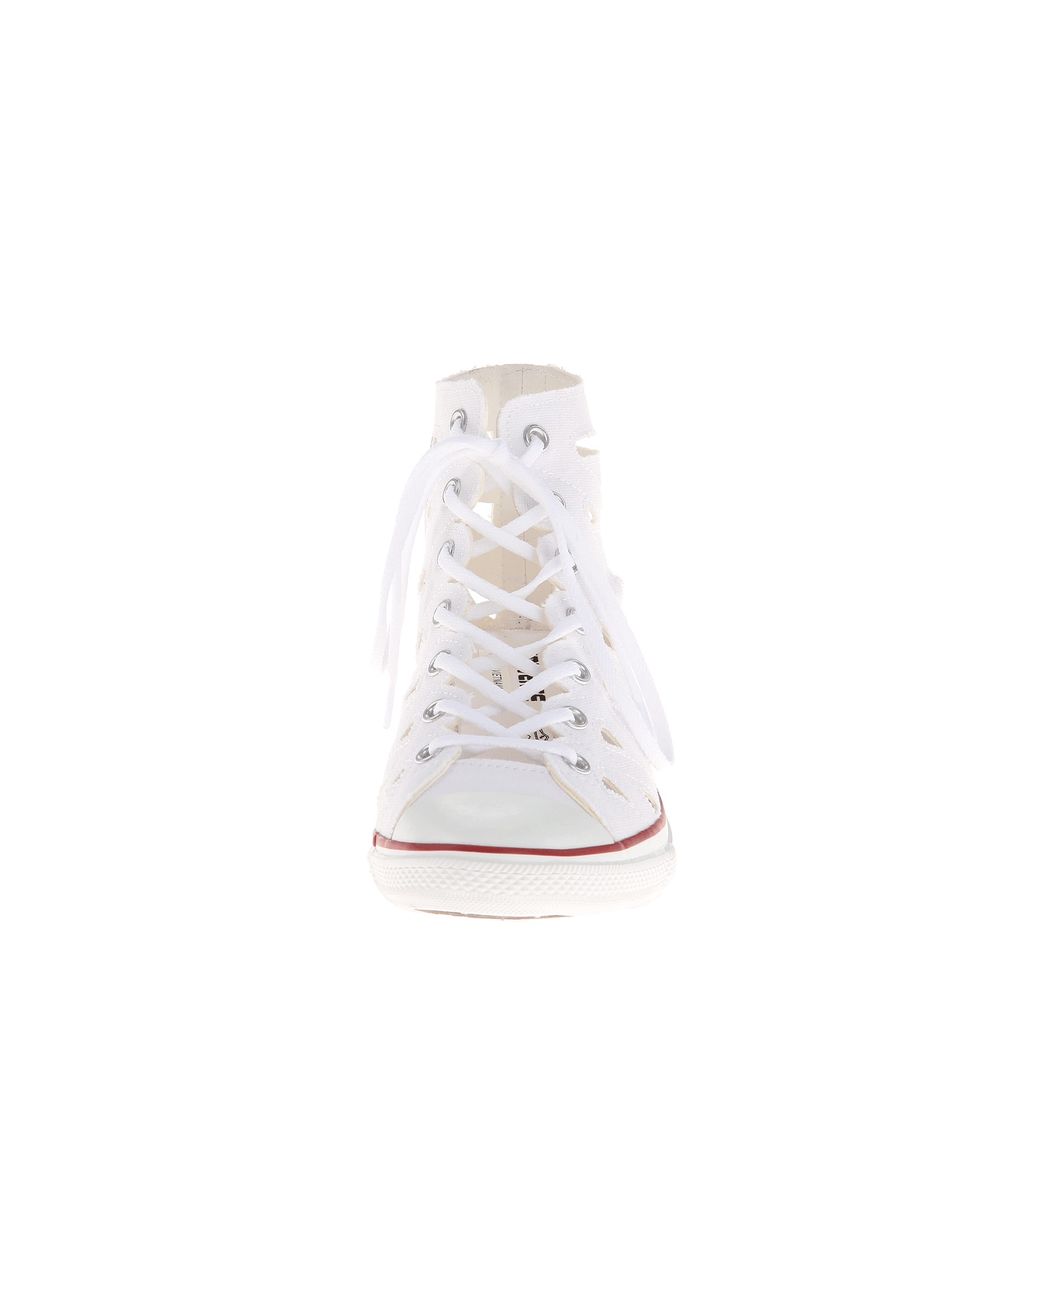 Converse Chuck Taylor All Star Hiness Cutout in White | Lyst